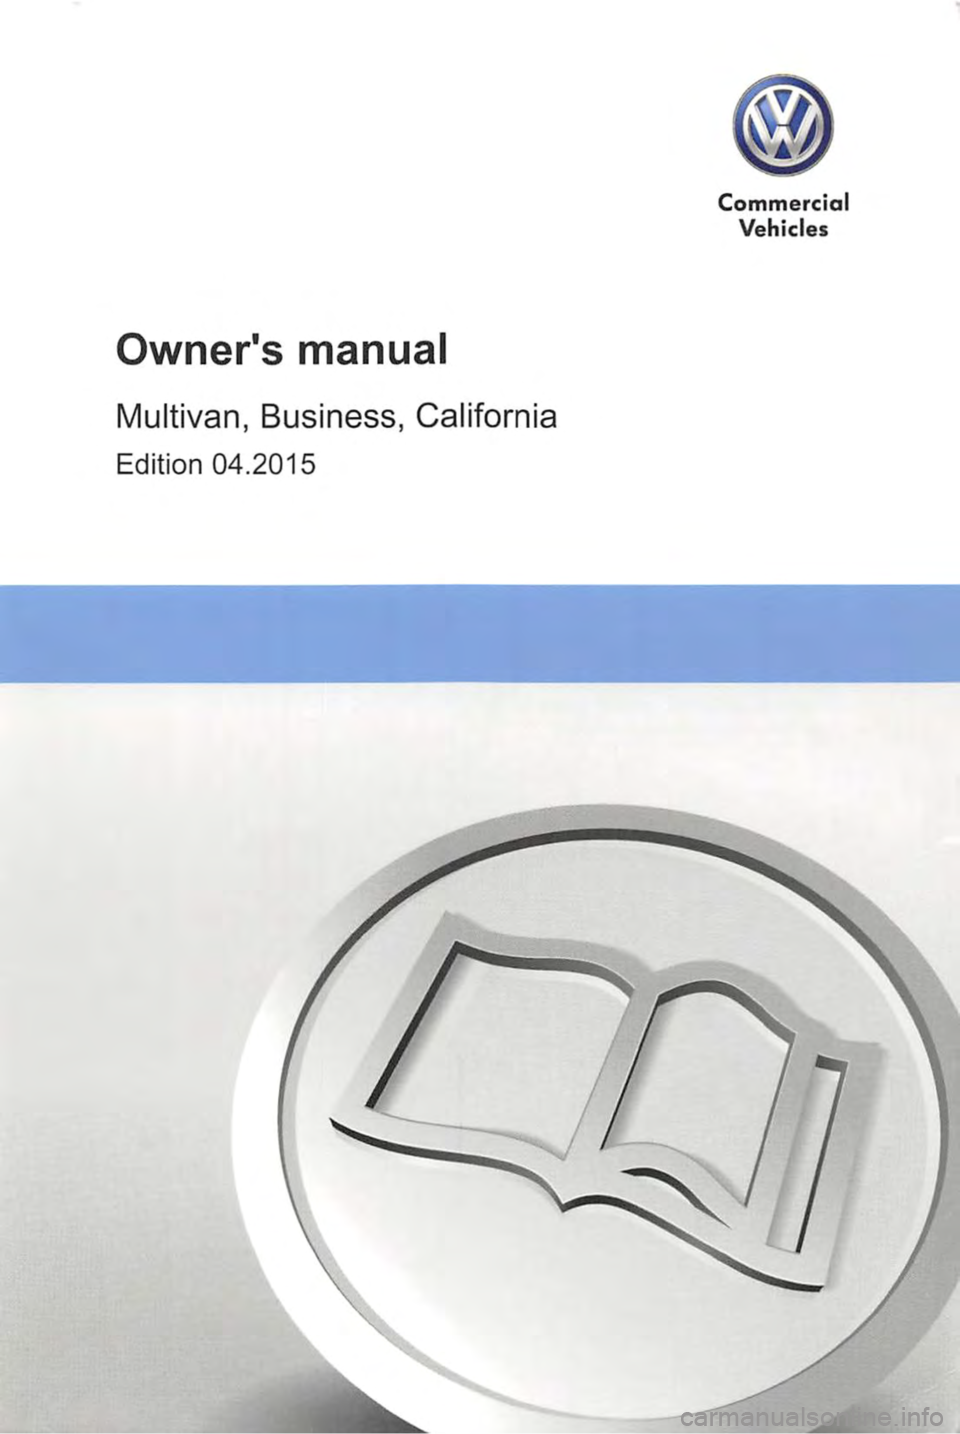 VOLKSWAGEN TRANSPORTER 2020  Owners Manual Owners manual 
Multivan, Business, California 
Edition 04.2015 
Commercial 
Vehicles  